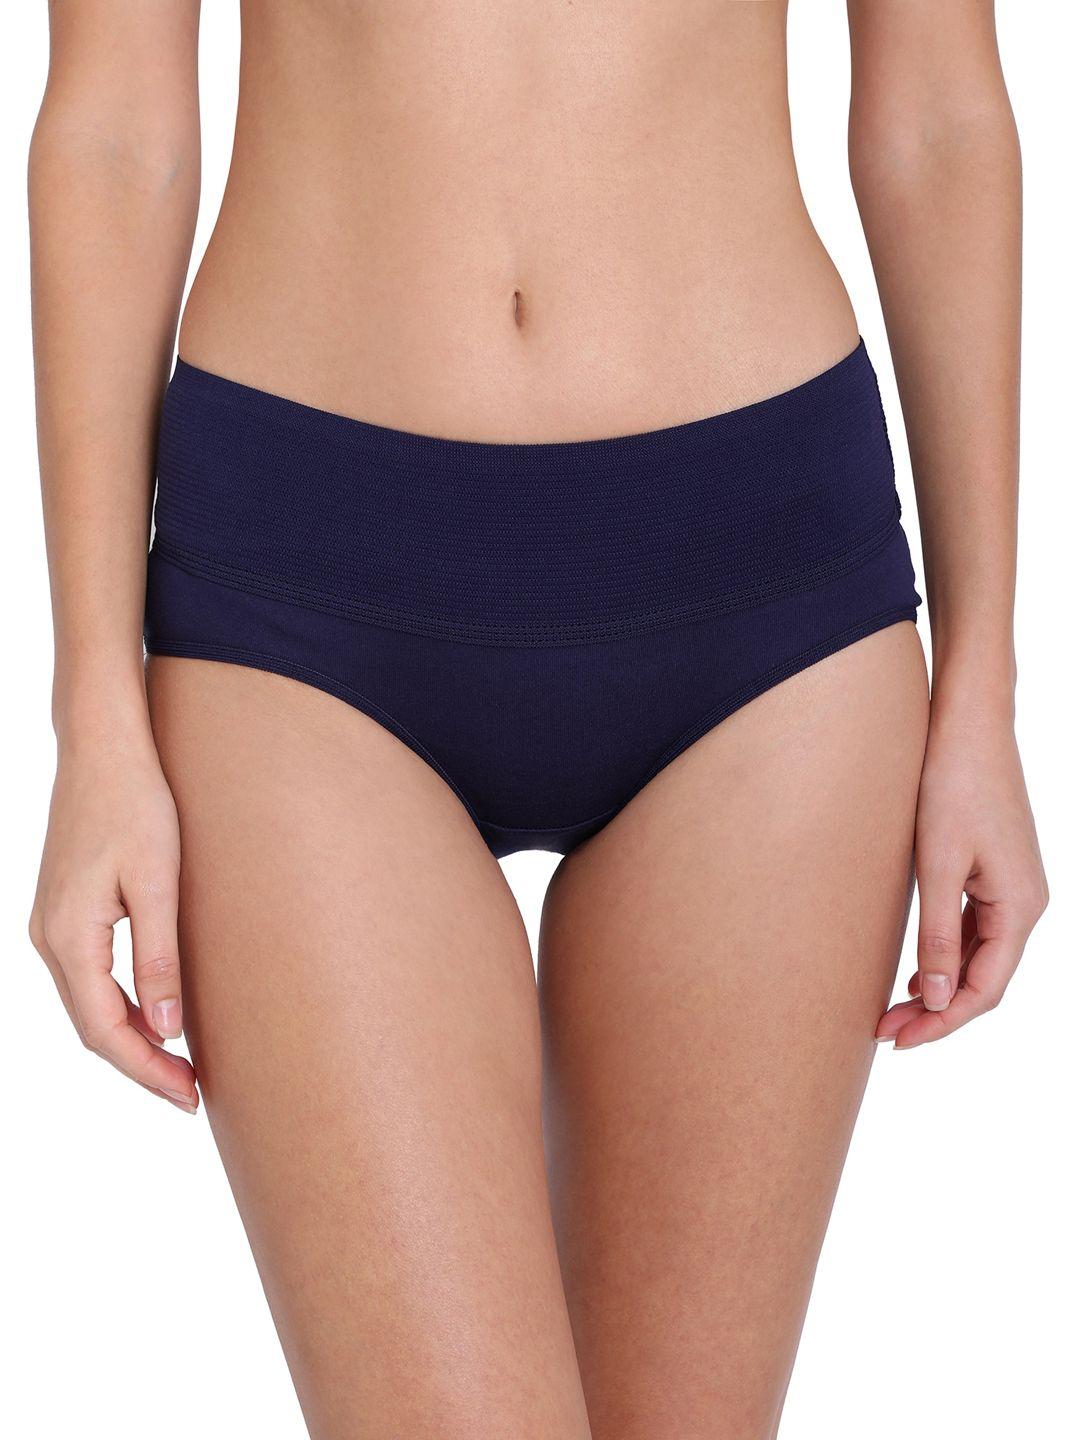 redrose-women-navy-blue-solid-high-rise-hipster-briefs